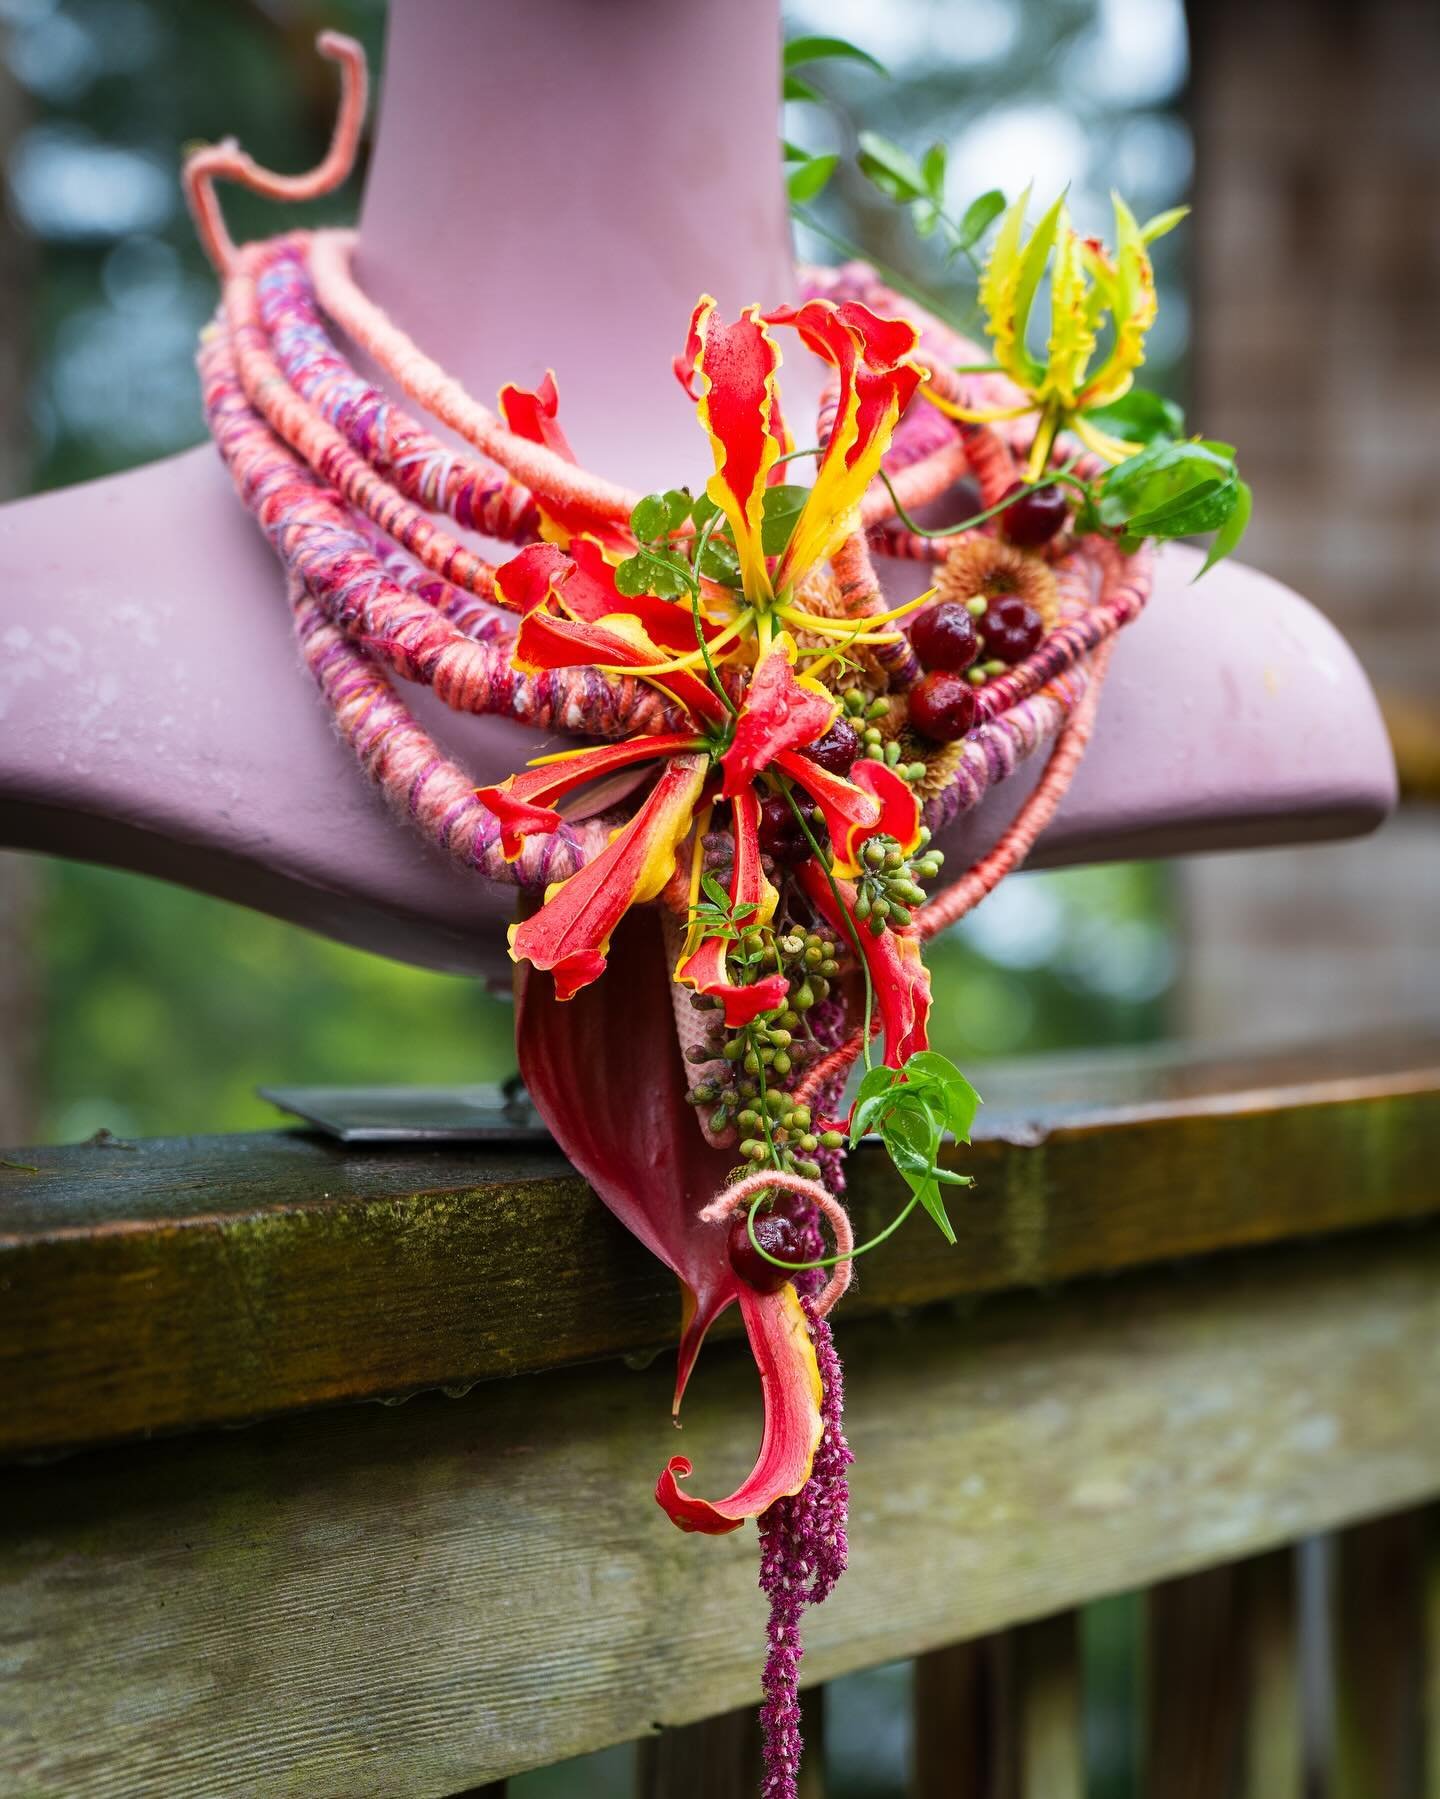 Only COLOR  I will wear is FLOWER!!! 📷by @colingilliamphoto #color #flower #floralcouture #gloriosalily #gloriosa #japanbloomscanada #himejiflowerauction #anthurium #hfna